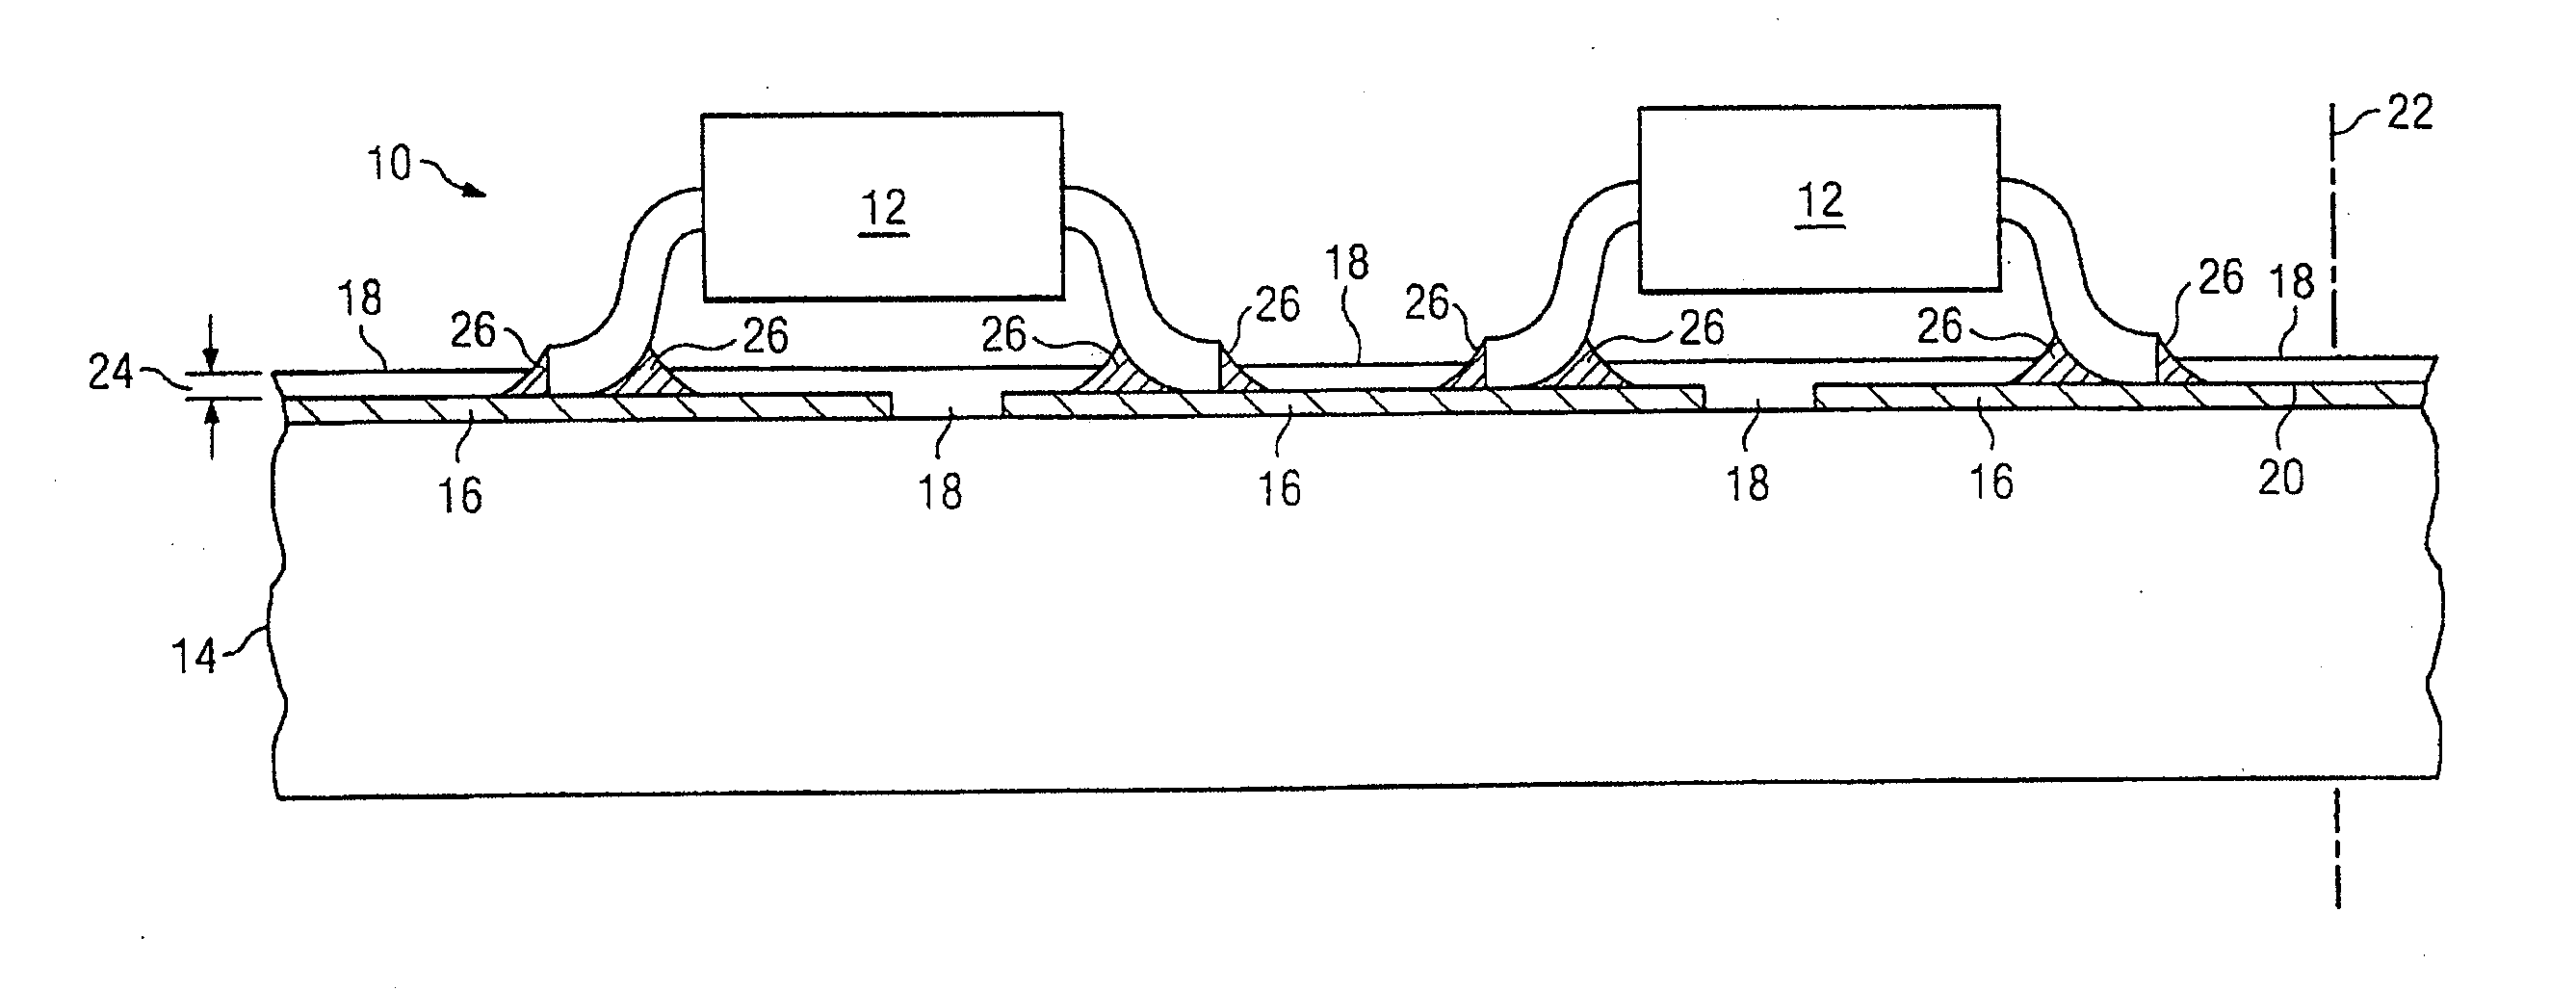 Apparatus with a Multi-Layer Coating and Method of Forming the Same